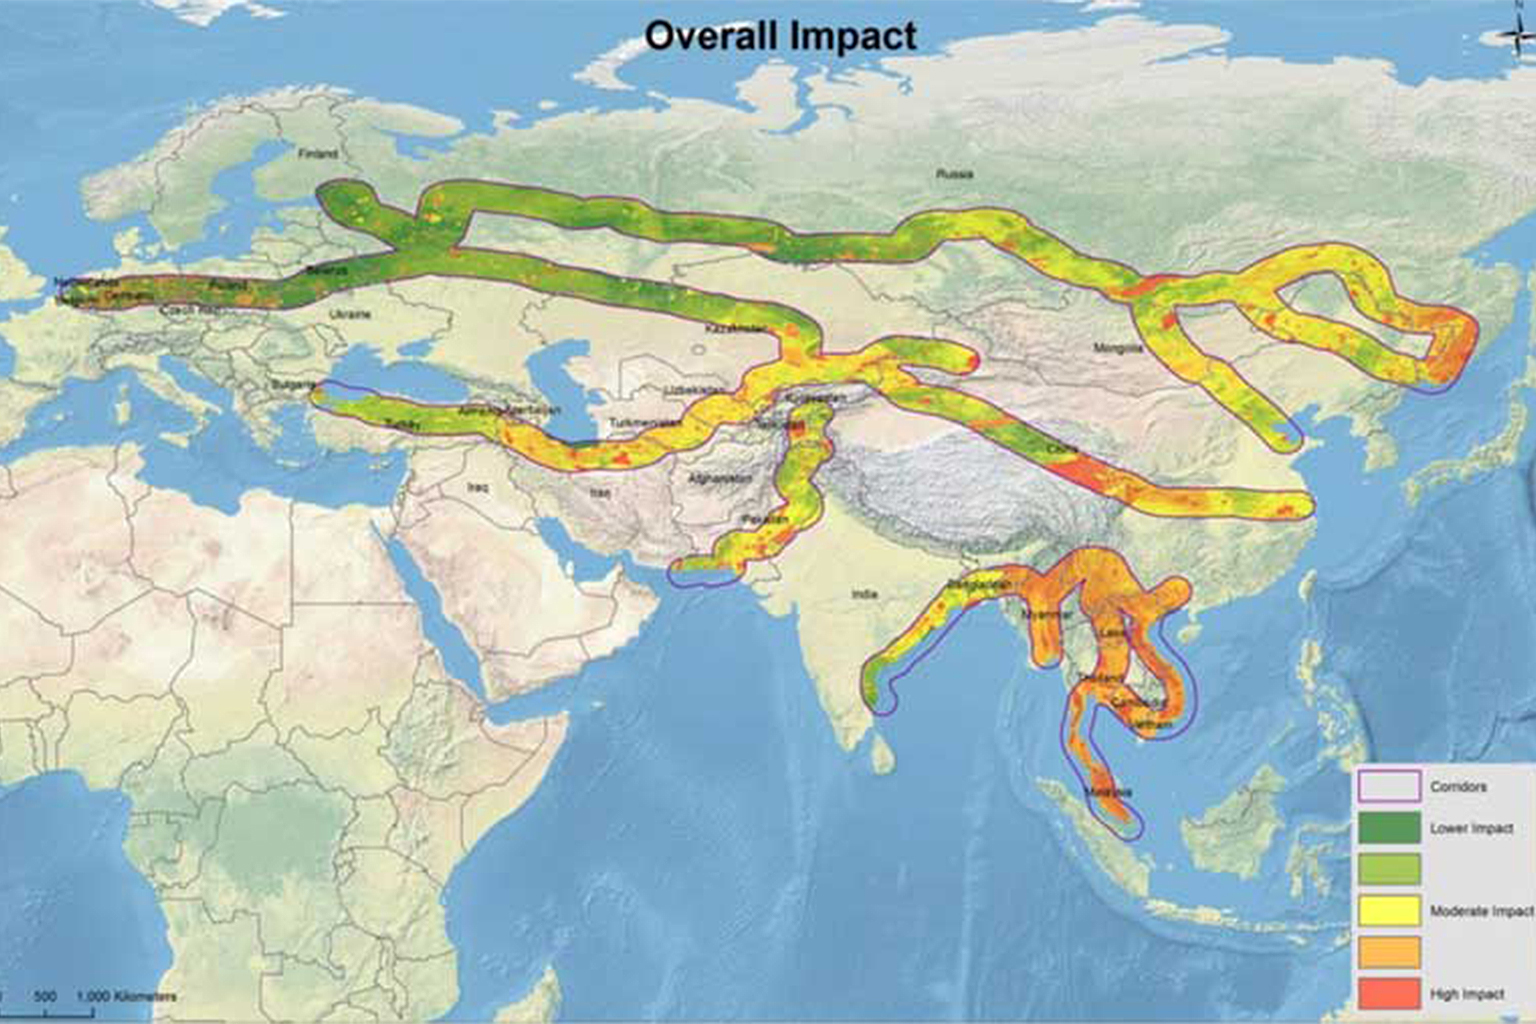 This map provides an overview of the land areas slated for infrastructure development, and likely to be at highest environmental risk, as a result of China’s Belt and Road corridors.